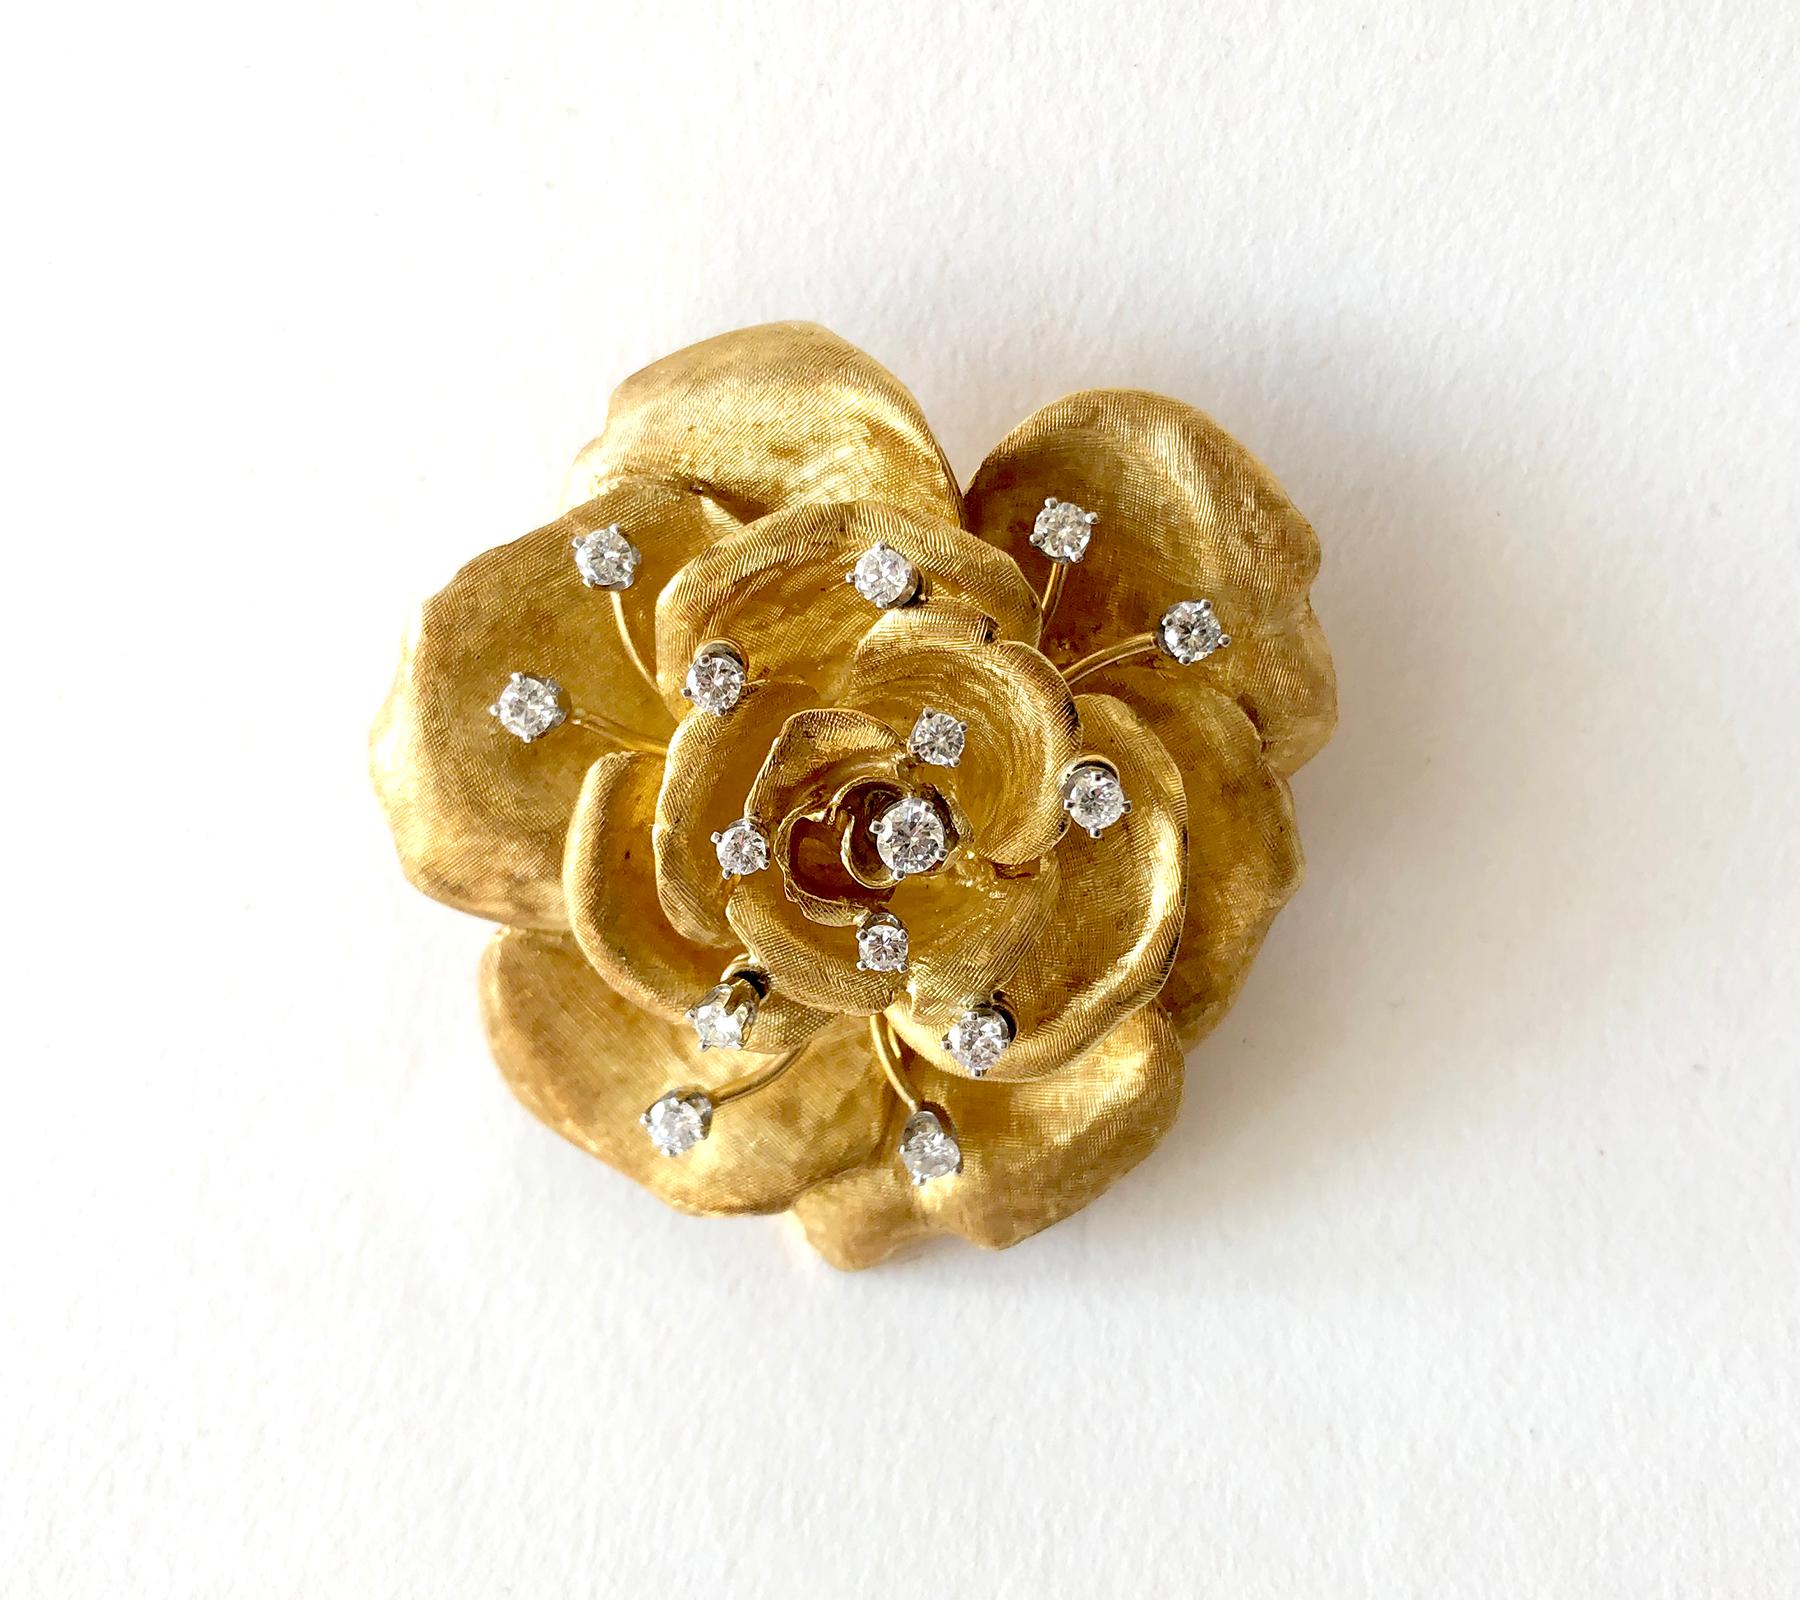 An 18 karat gold and diamond rose flowering brooch and matching earrings created by Cartier of France. The set has a Florentine finish to the petals with 15 full cut diamonds in the brooch, some of them en tremblant. The earrings have one single